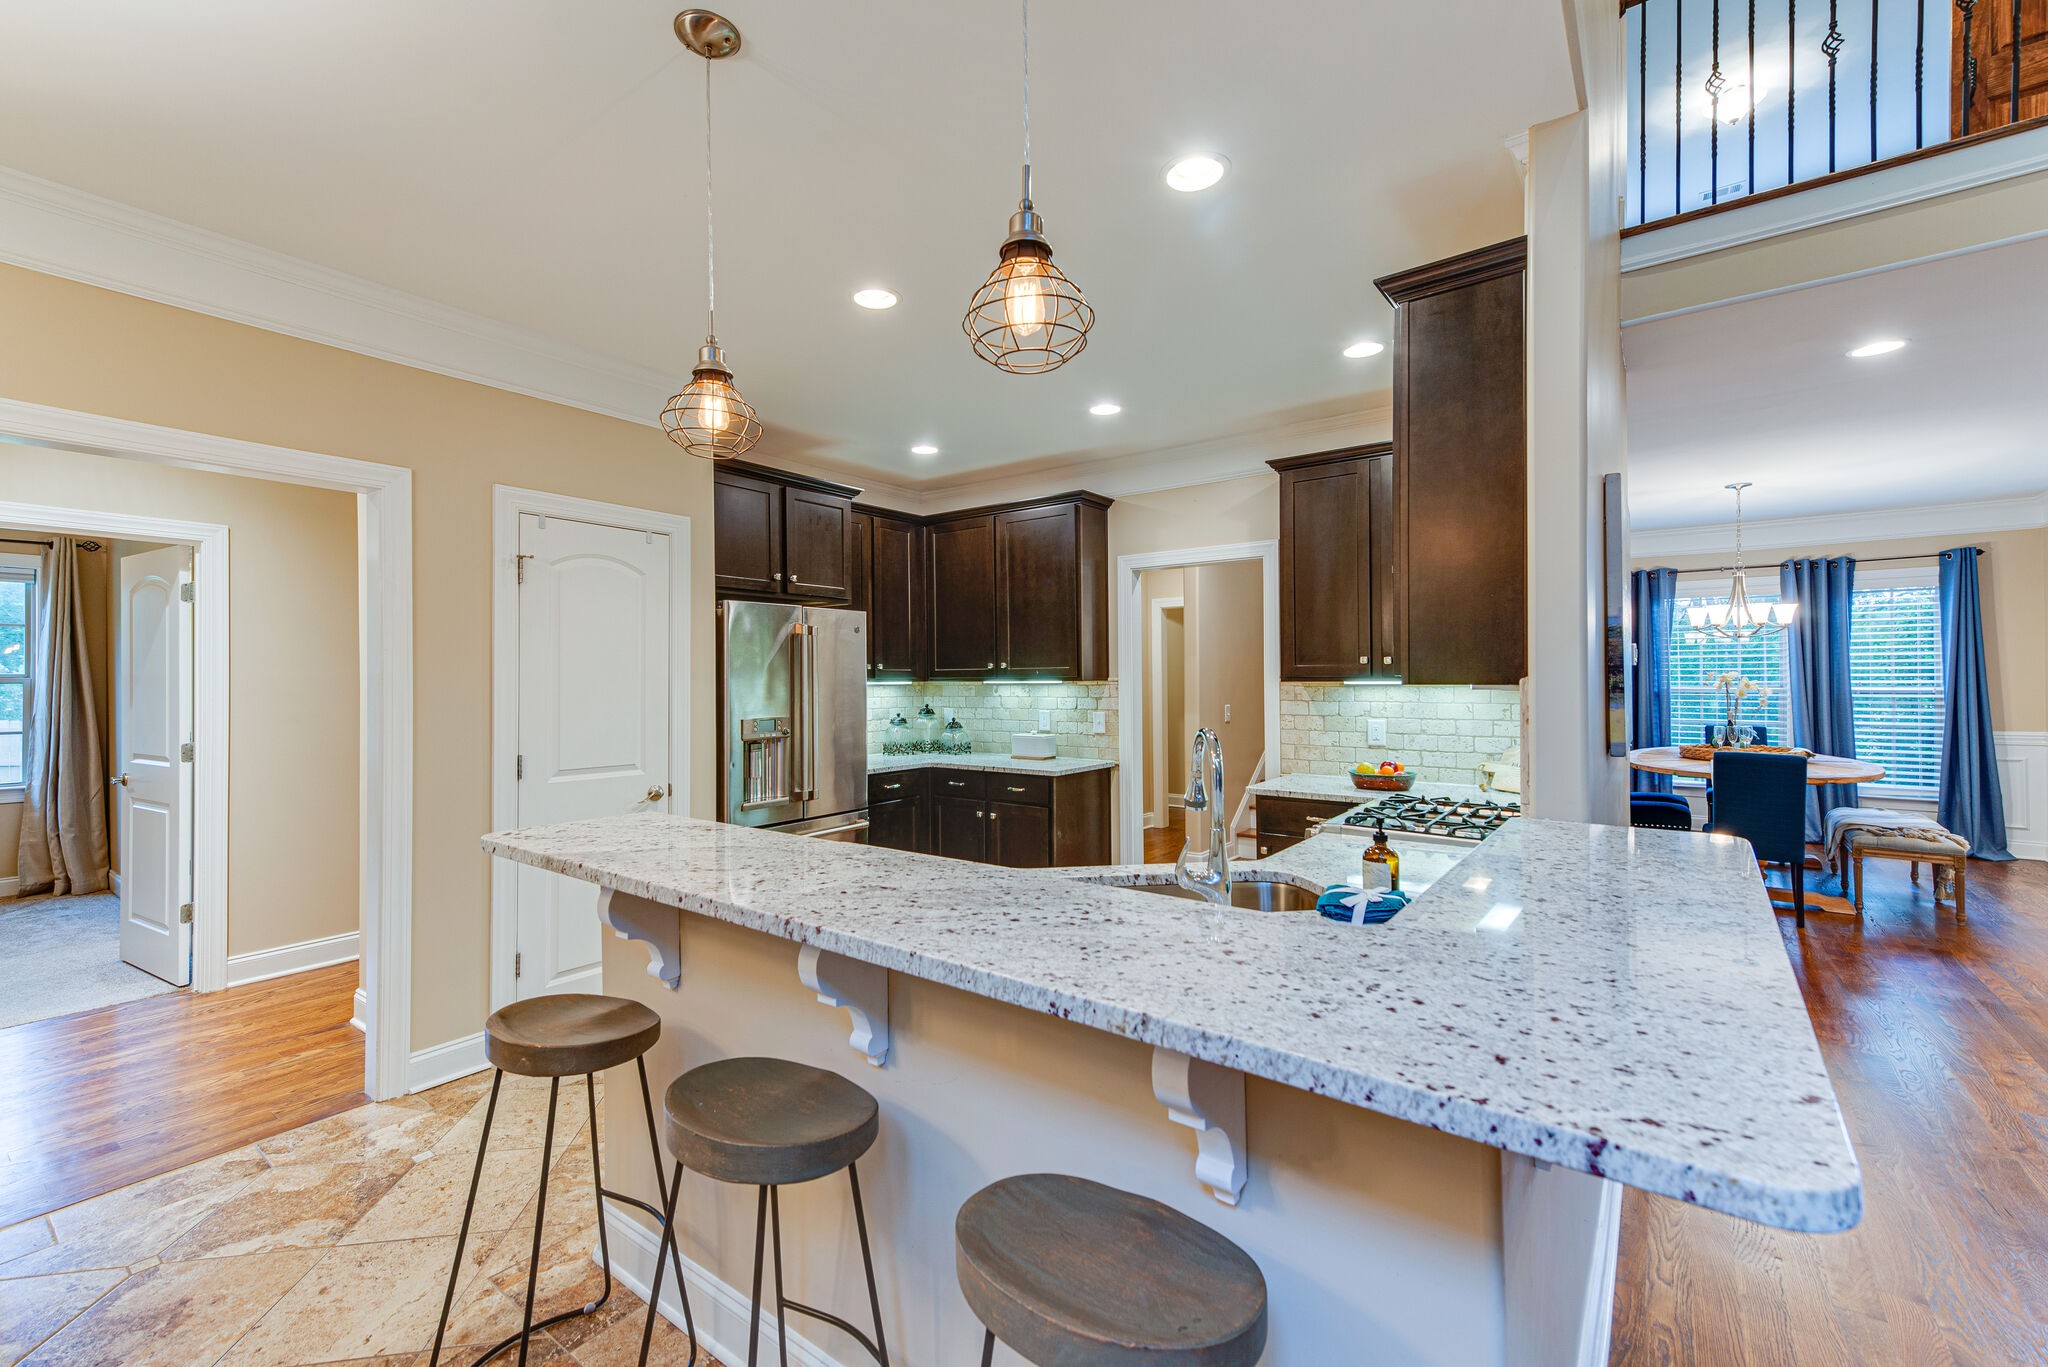 a kitchen with granite countertop kitchen island stainless steel appliances a sink and a refrigerator